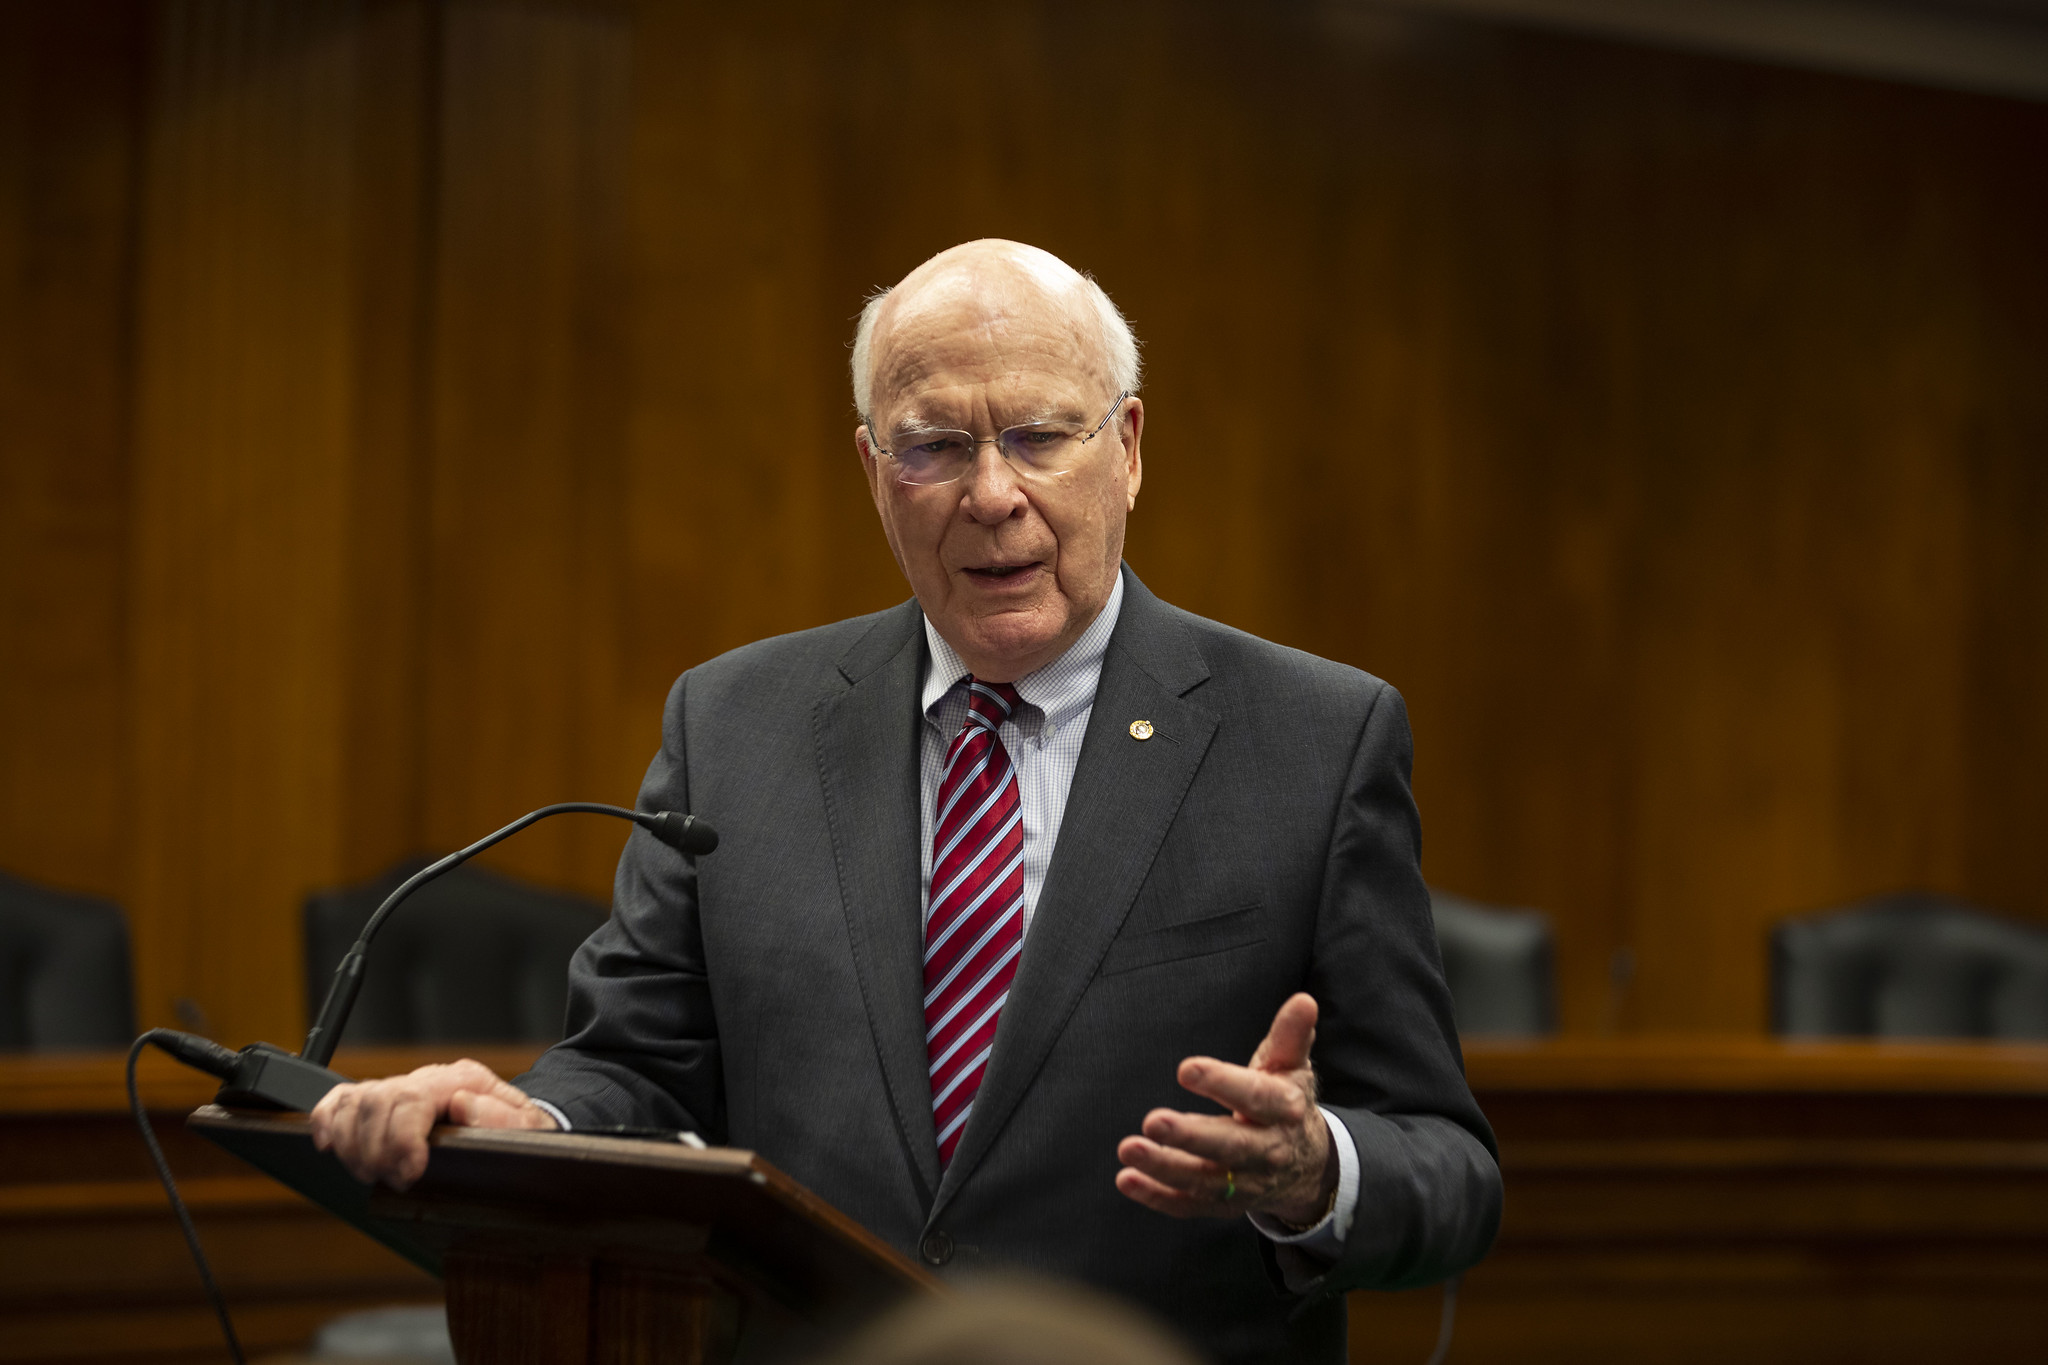 Sen. Patrick Leahy recognizes World Learning’s global impact in statement to US Senate